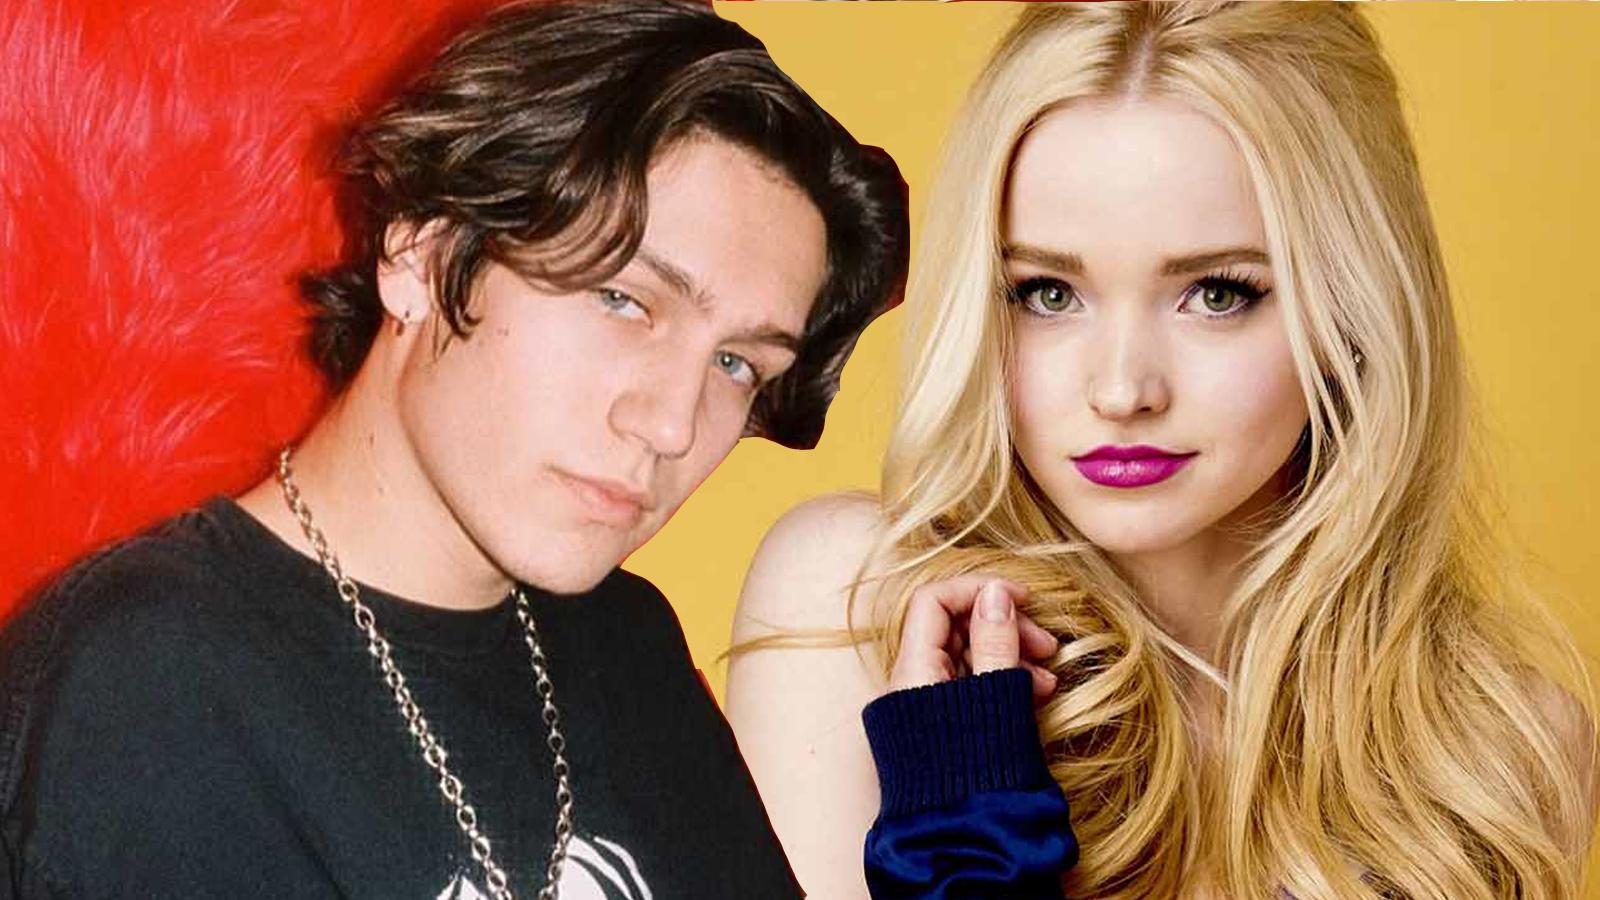 chase hudson and dove cameron